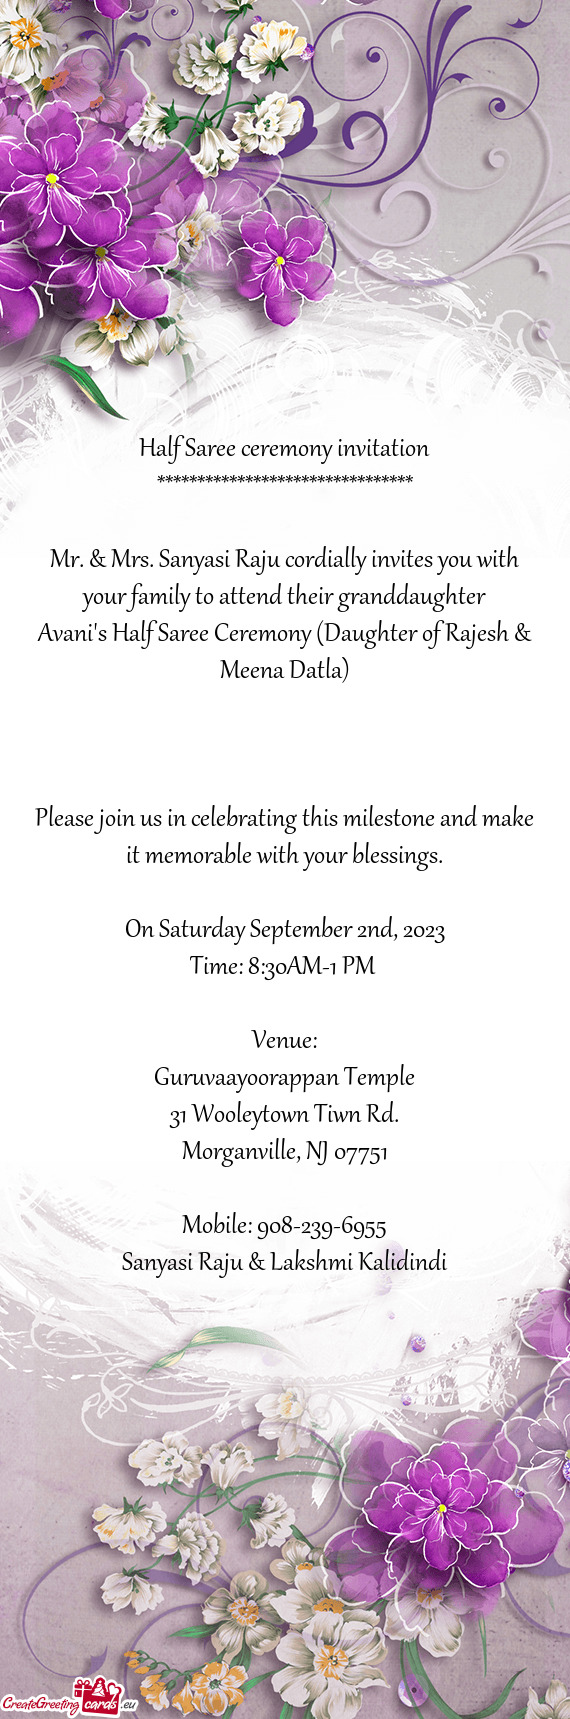 Please join us in celebrating this milestone and make it memorable with your blessings